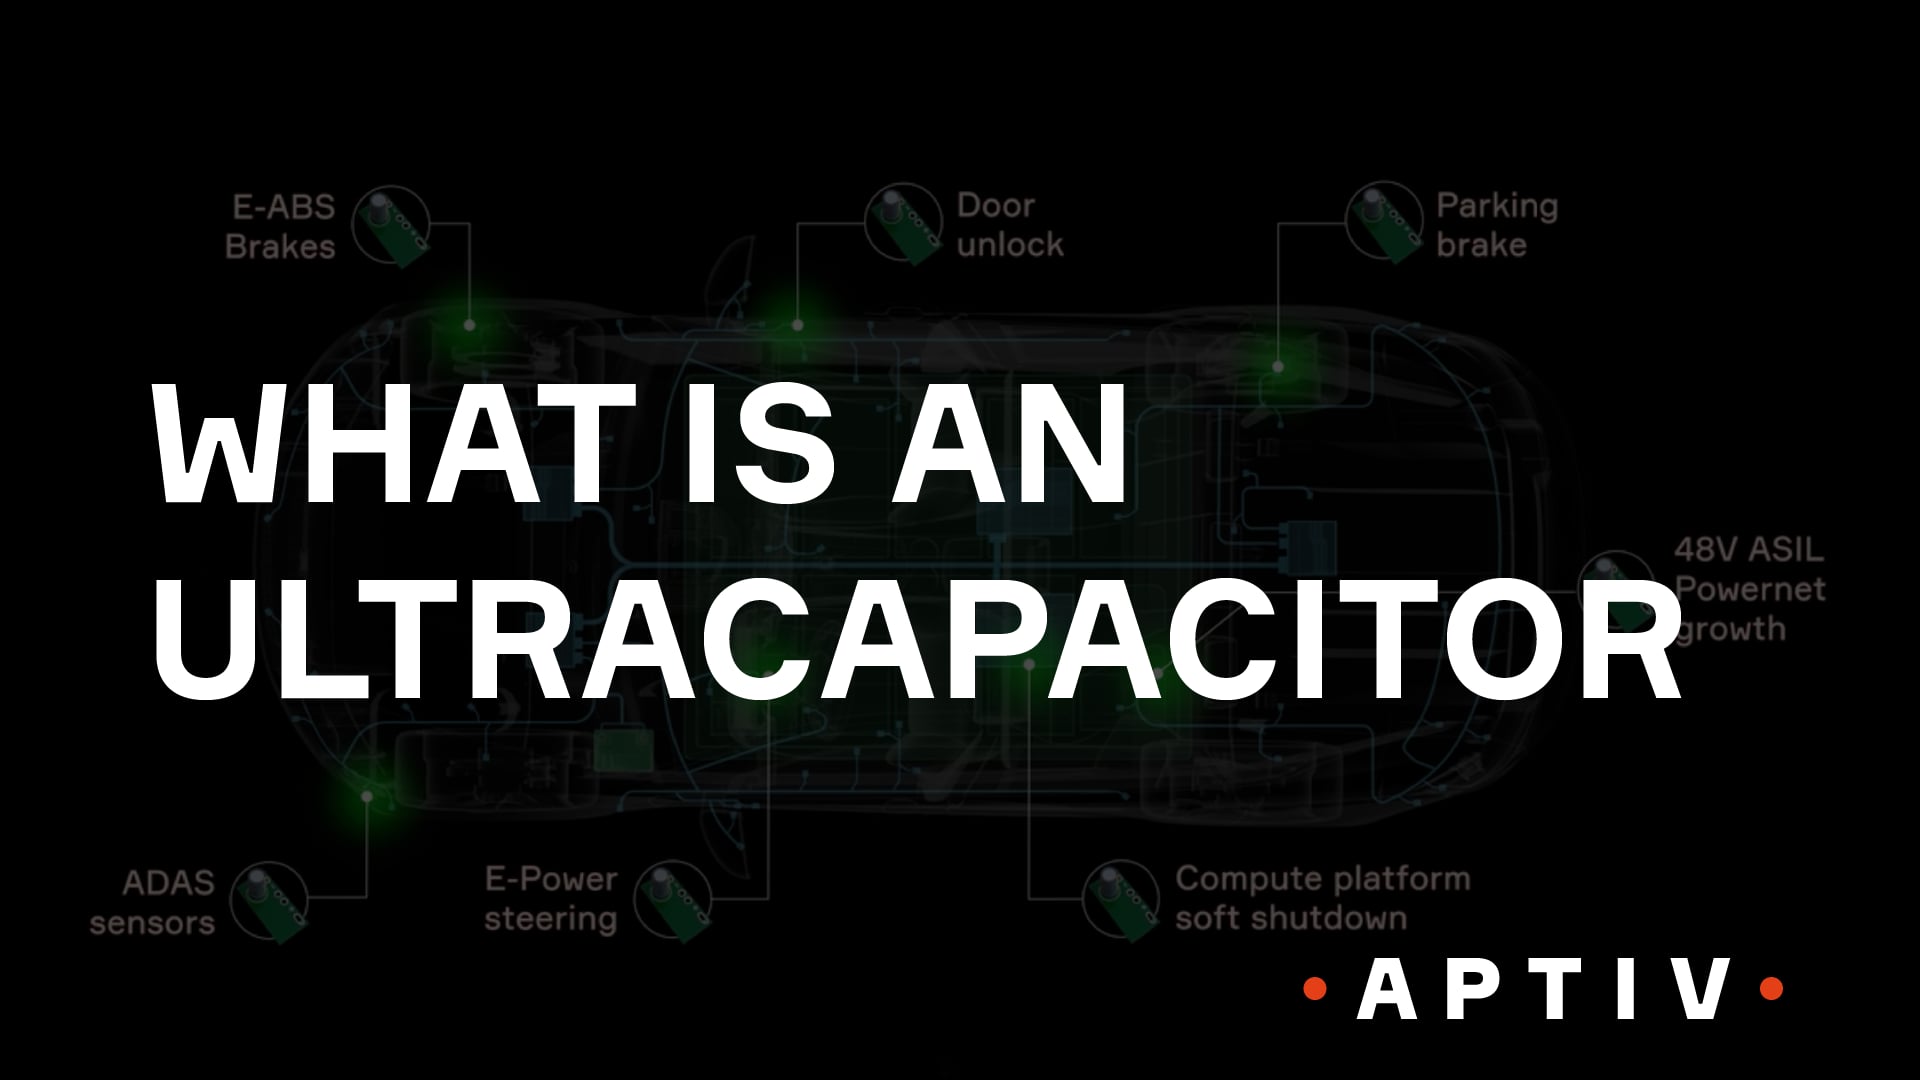 What Is an Ultracapacitor?